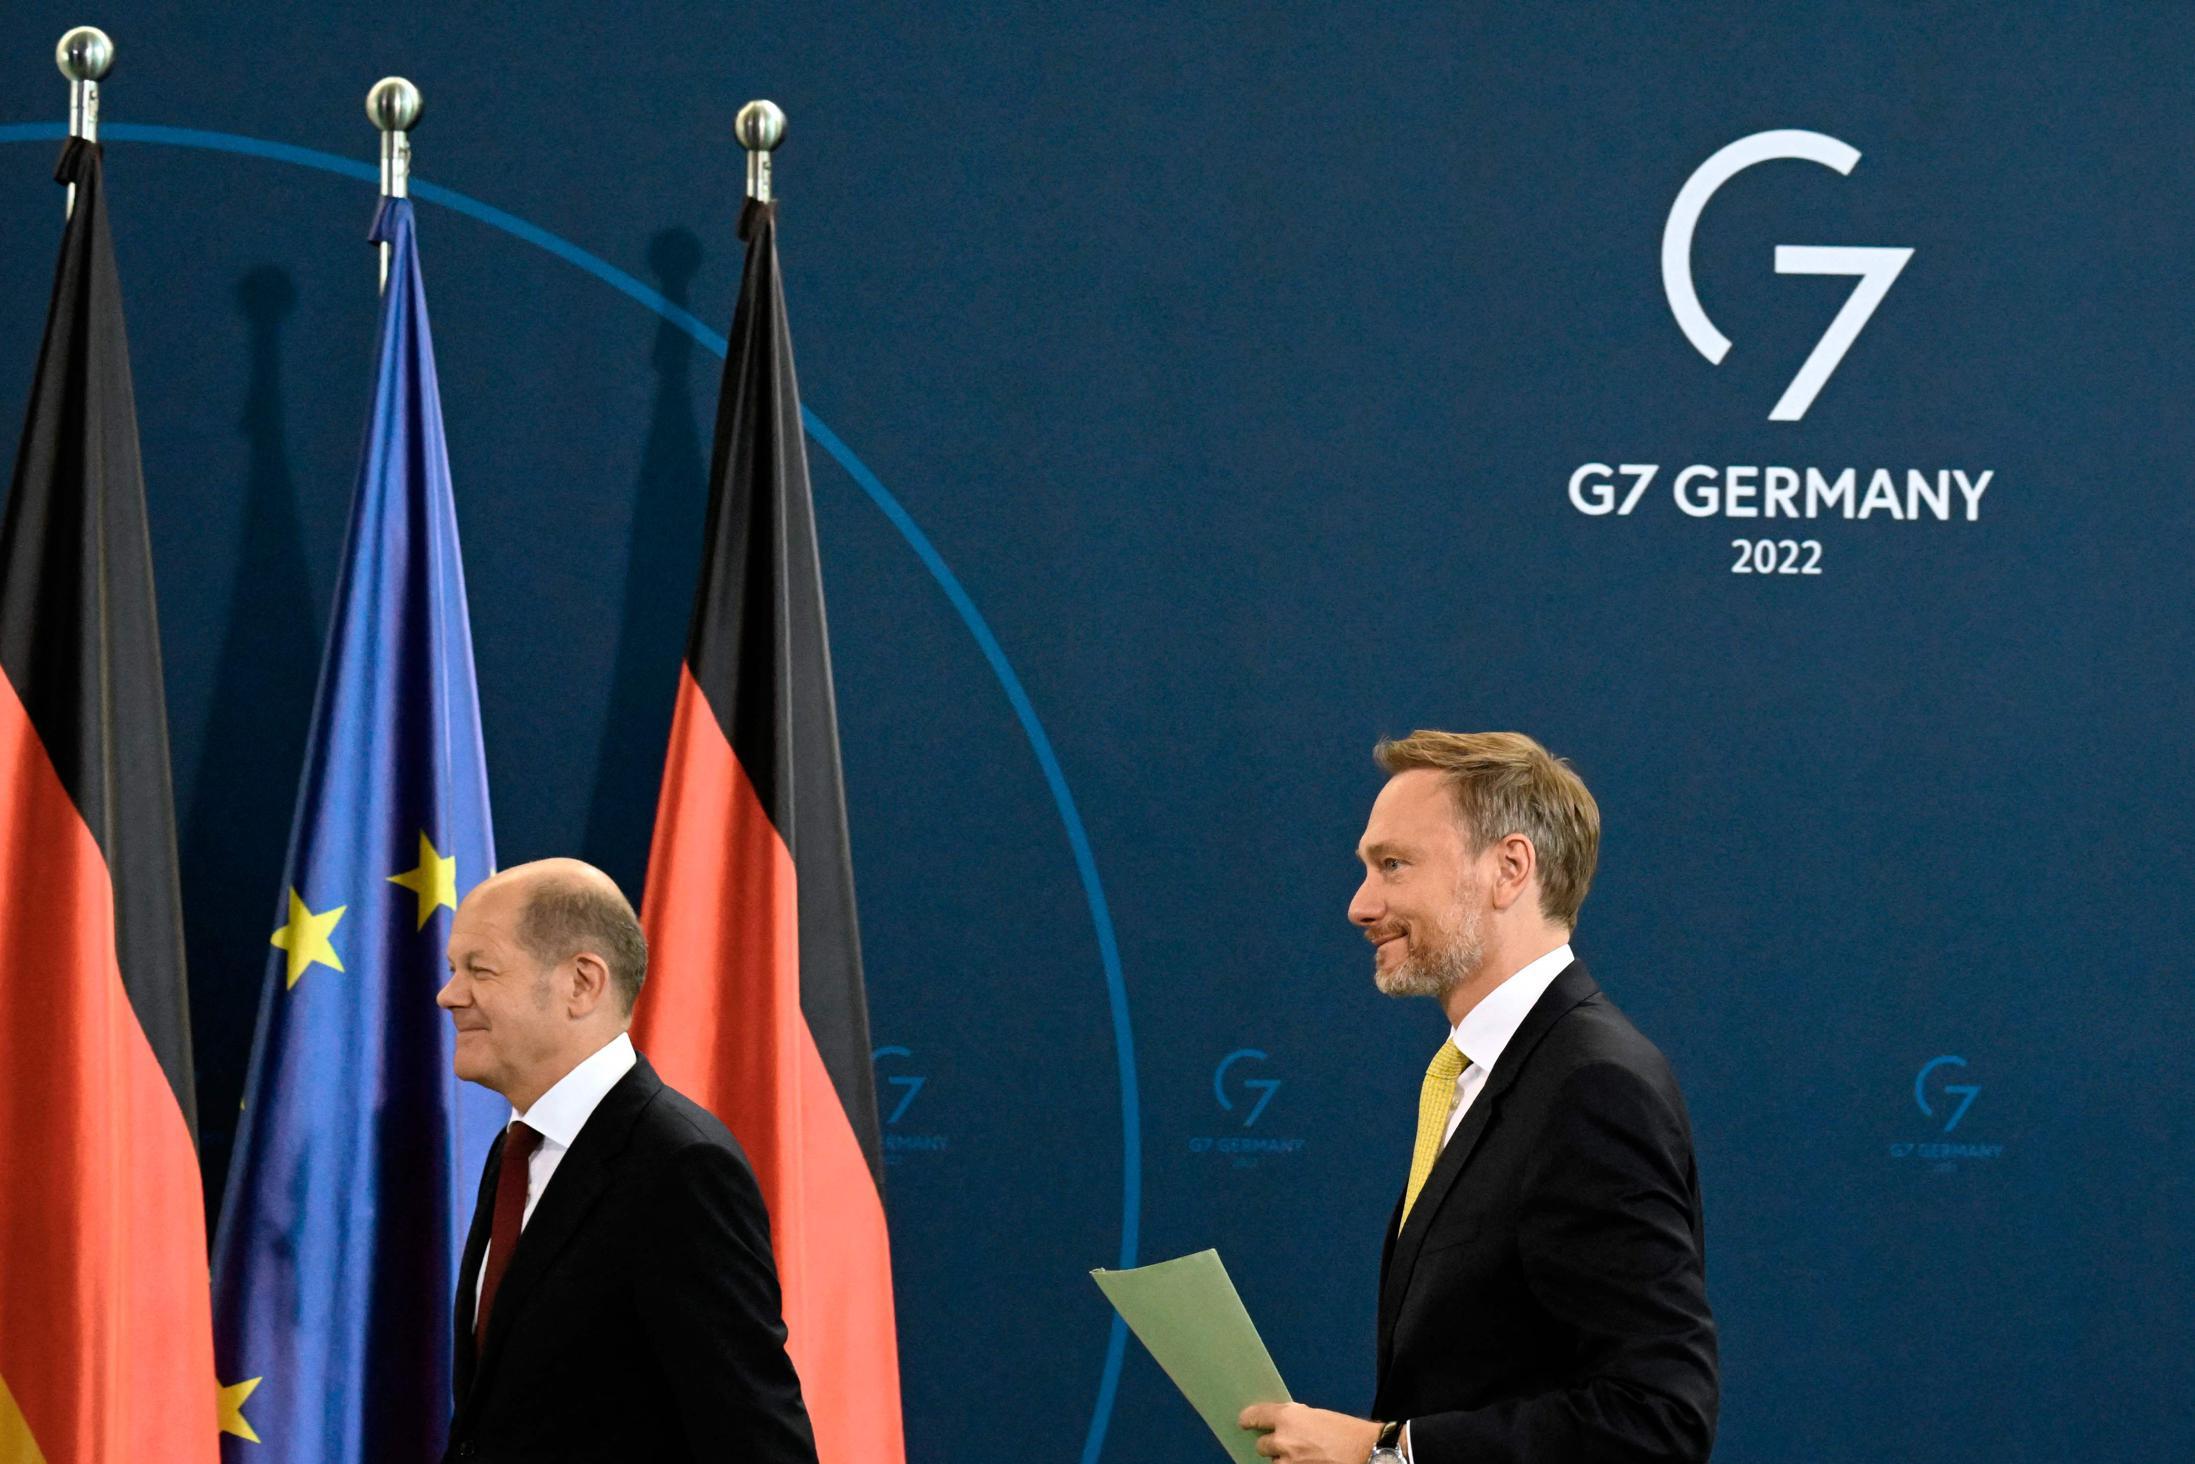 Confidential police documents about security from previous G7 summit in Germany leaked